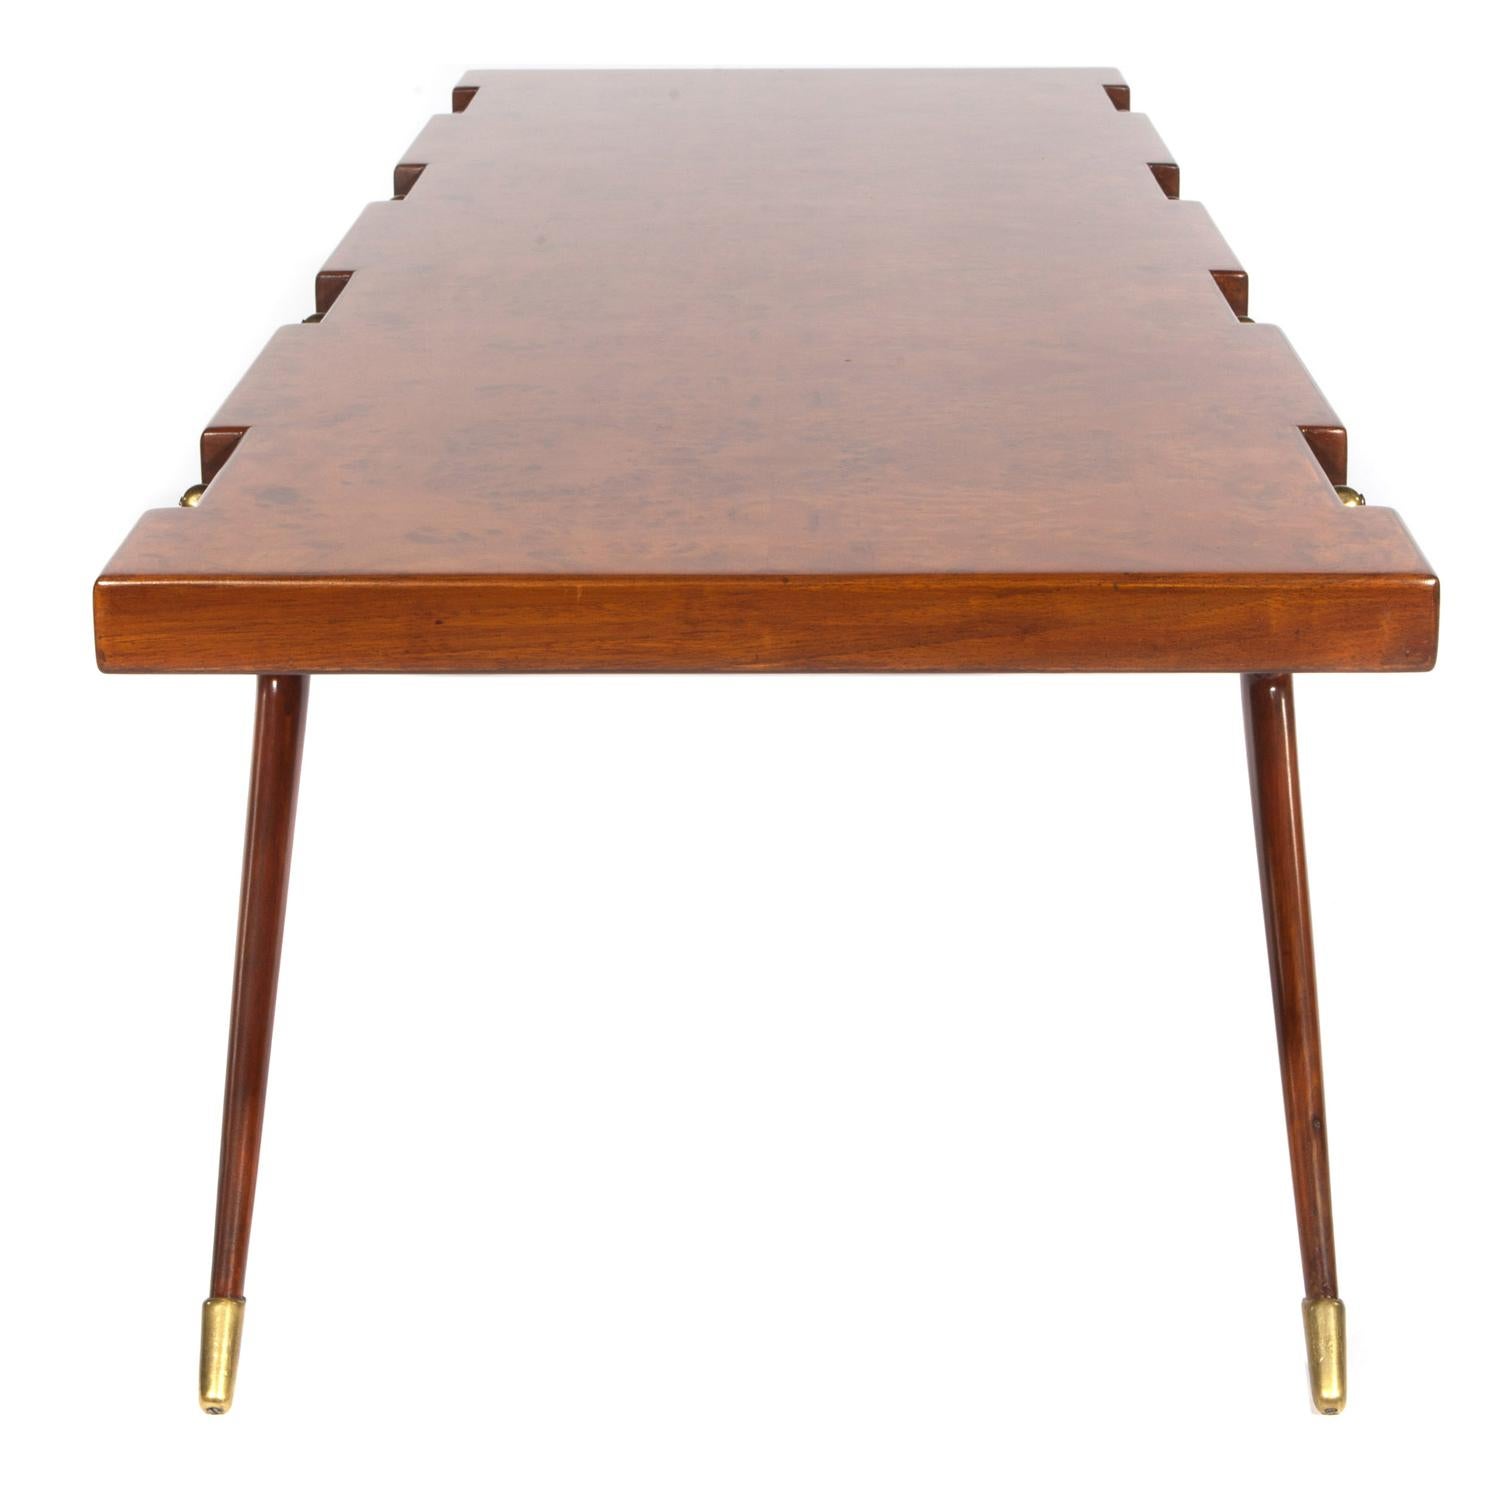 Scandinavian Modern Ico Parisi Sculptural Coffee Table in Burled Walnut with Brass Fittings, 1950s